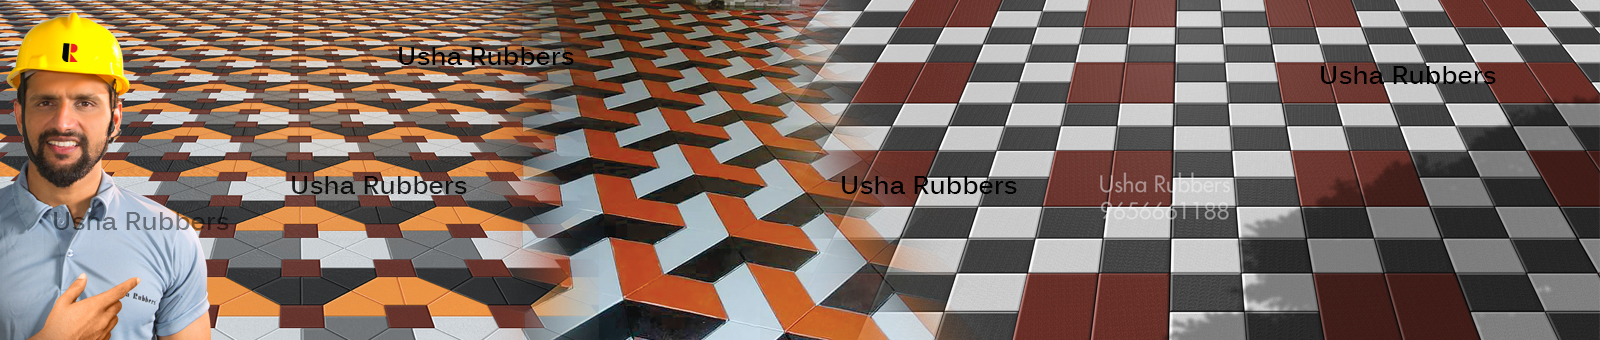 Rubber Moulds India